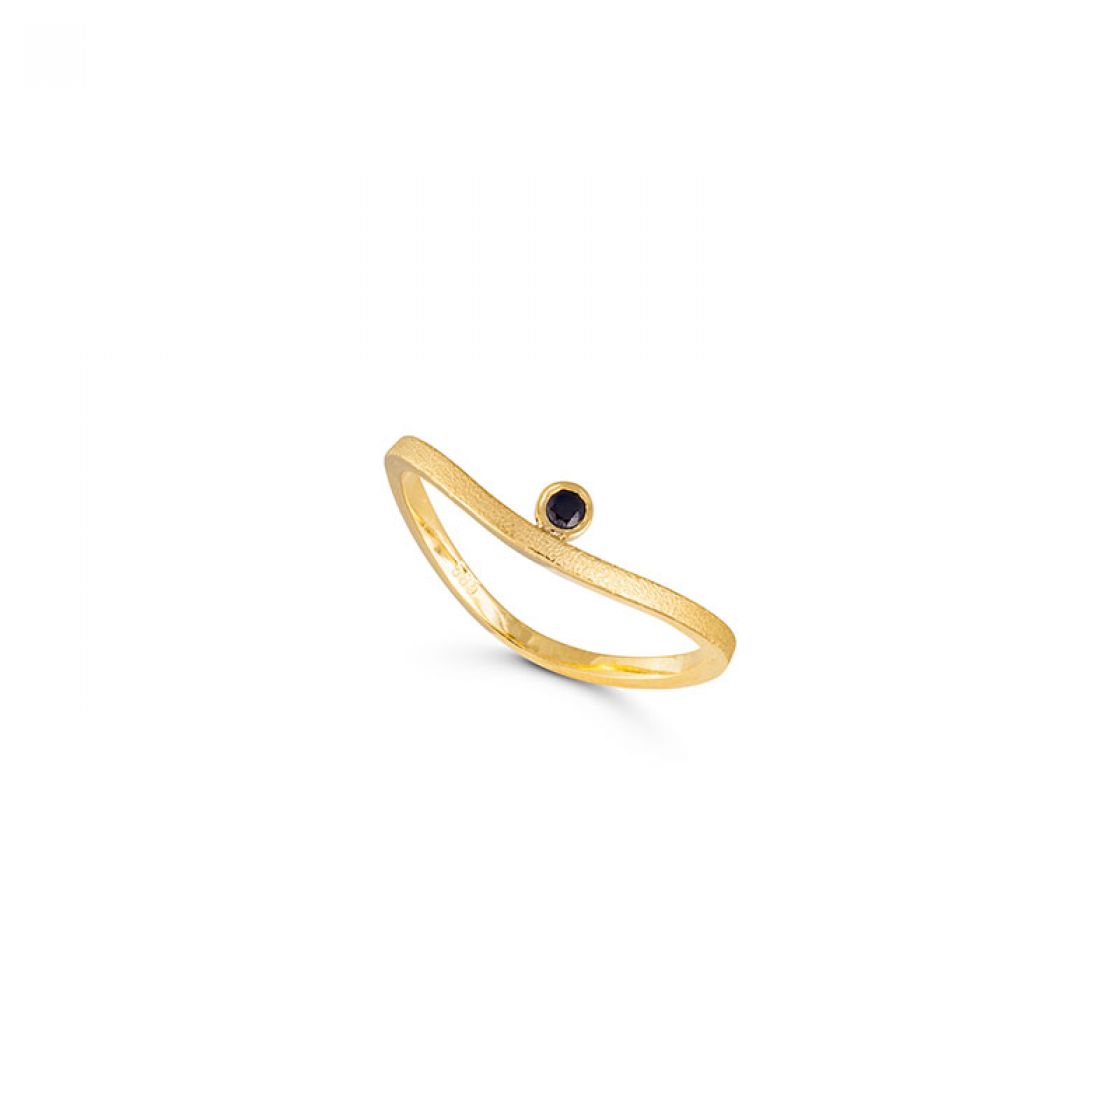 Simple and elegant asymmetrical ring accented with a black zircon stone in 14k gold